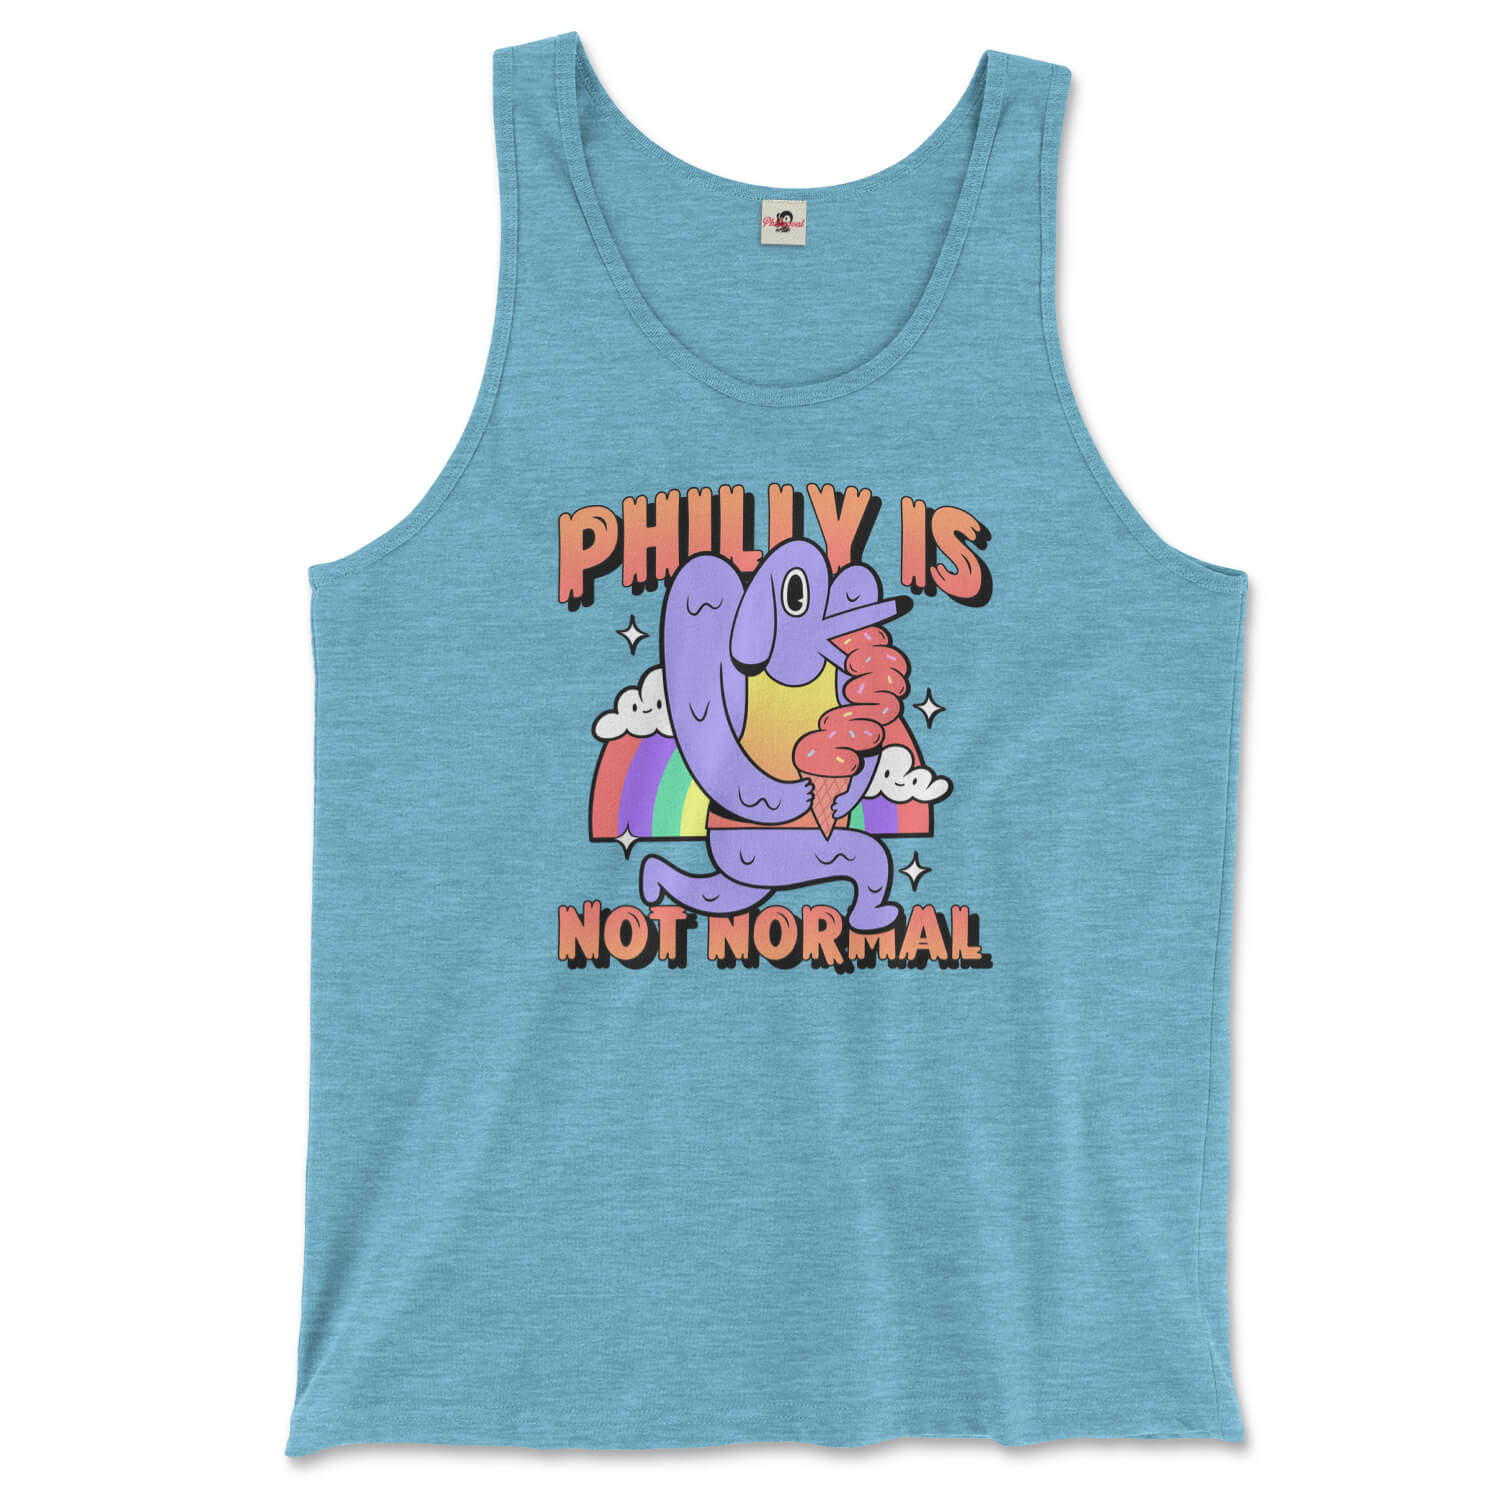 Philadelphia philly is not normal weird dog ice cream rainbow design on an aqua triblend tank top from Phillygoat